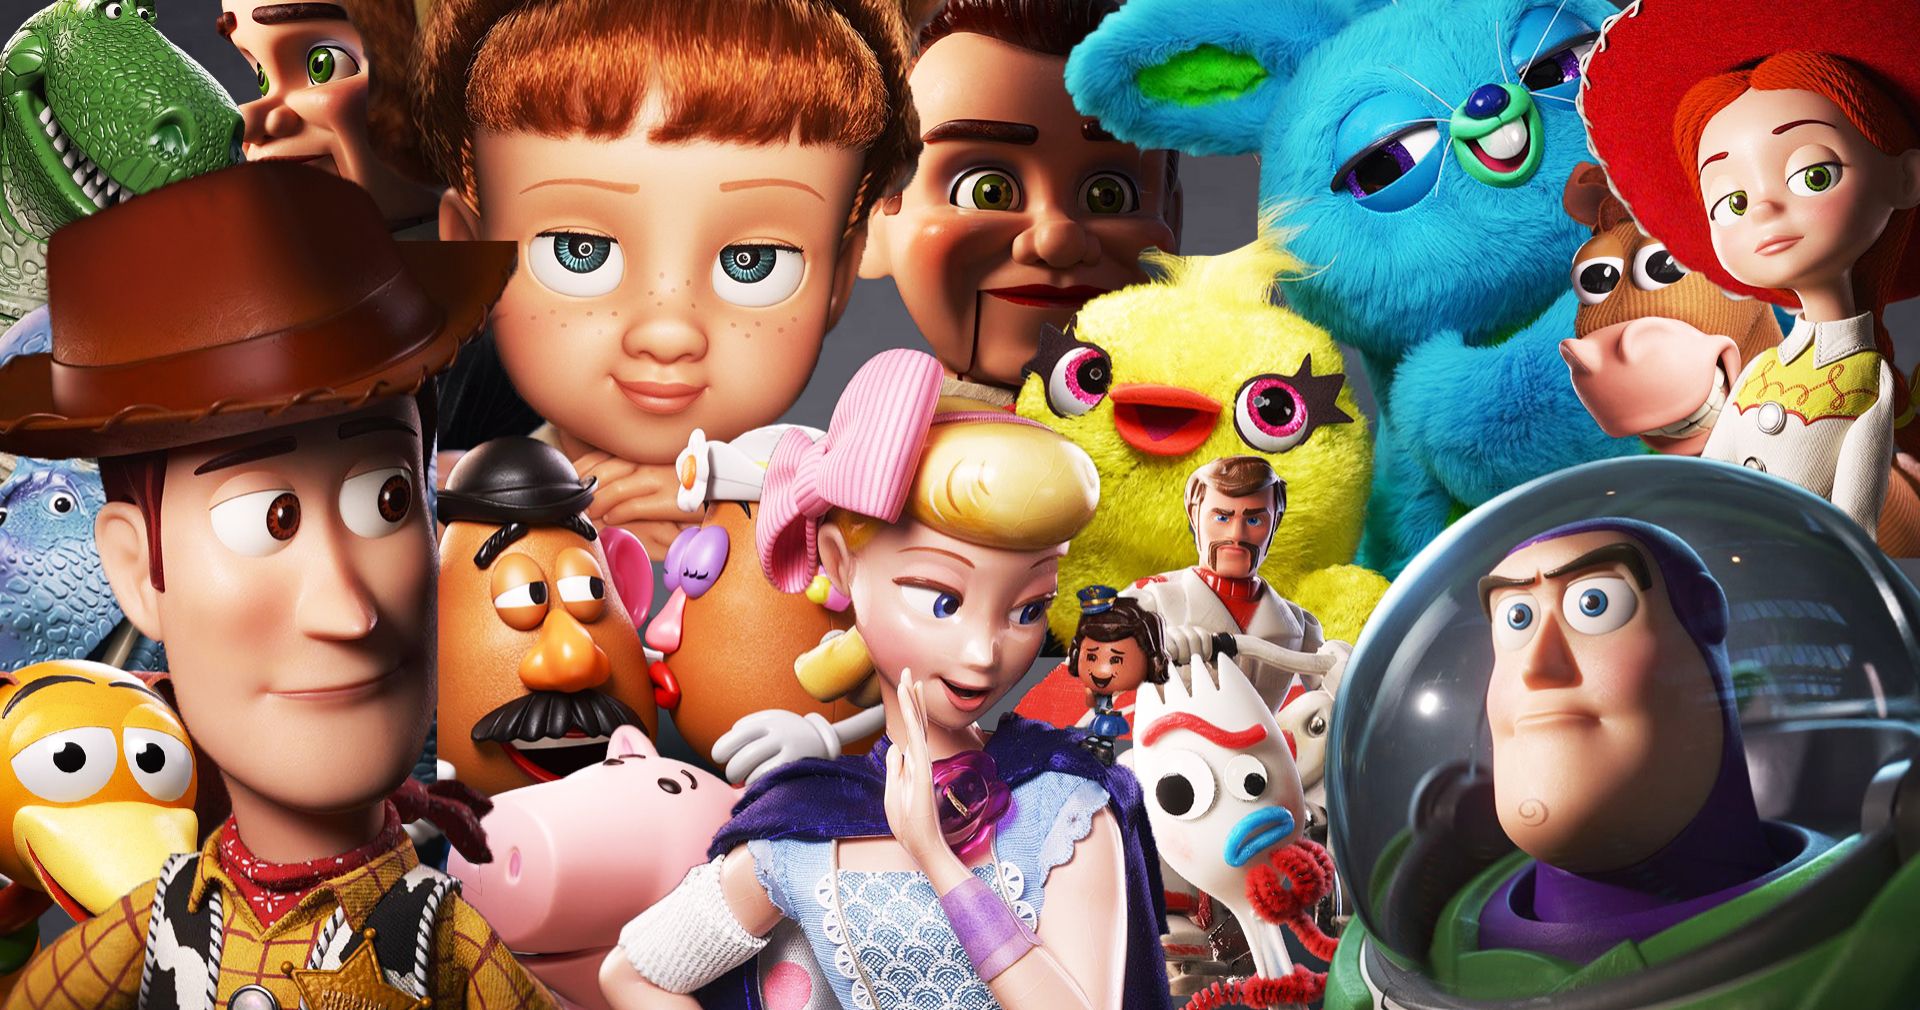 toy story 4 movie review